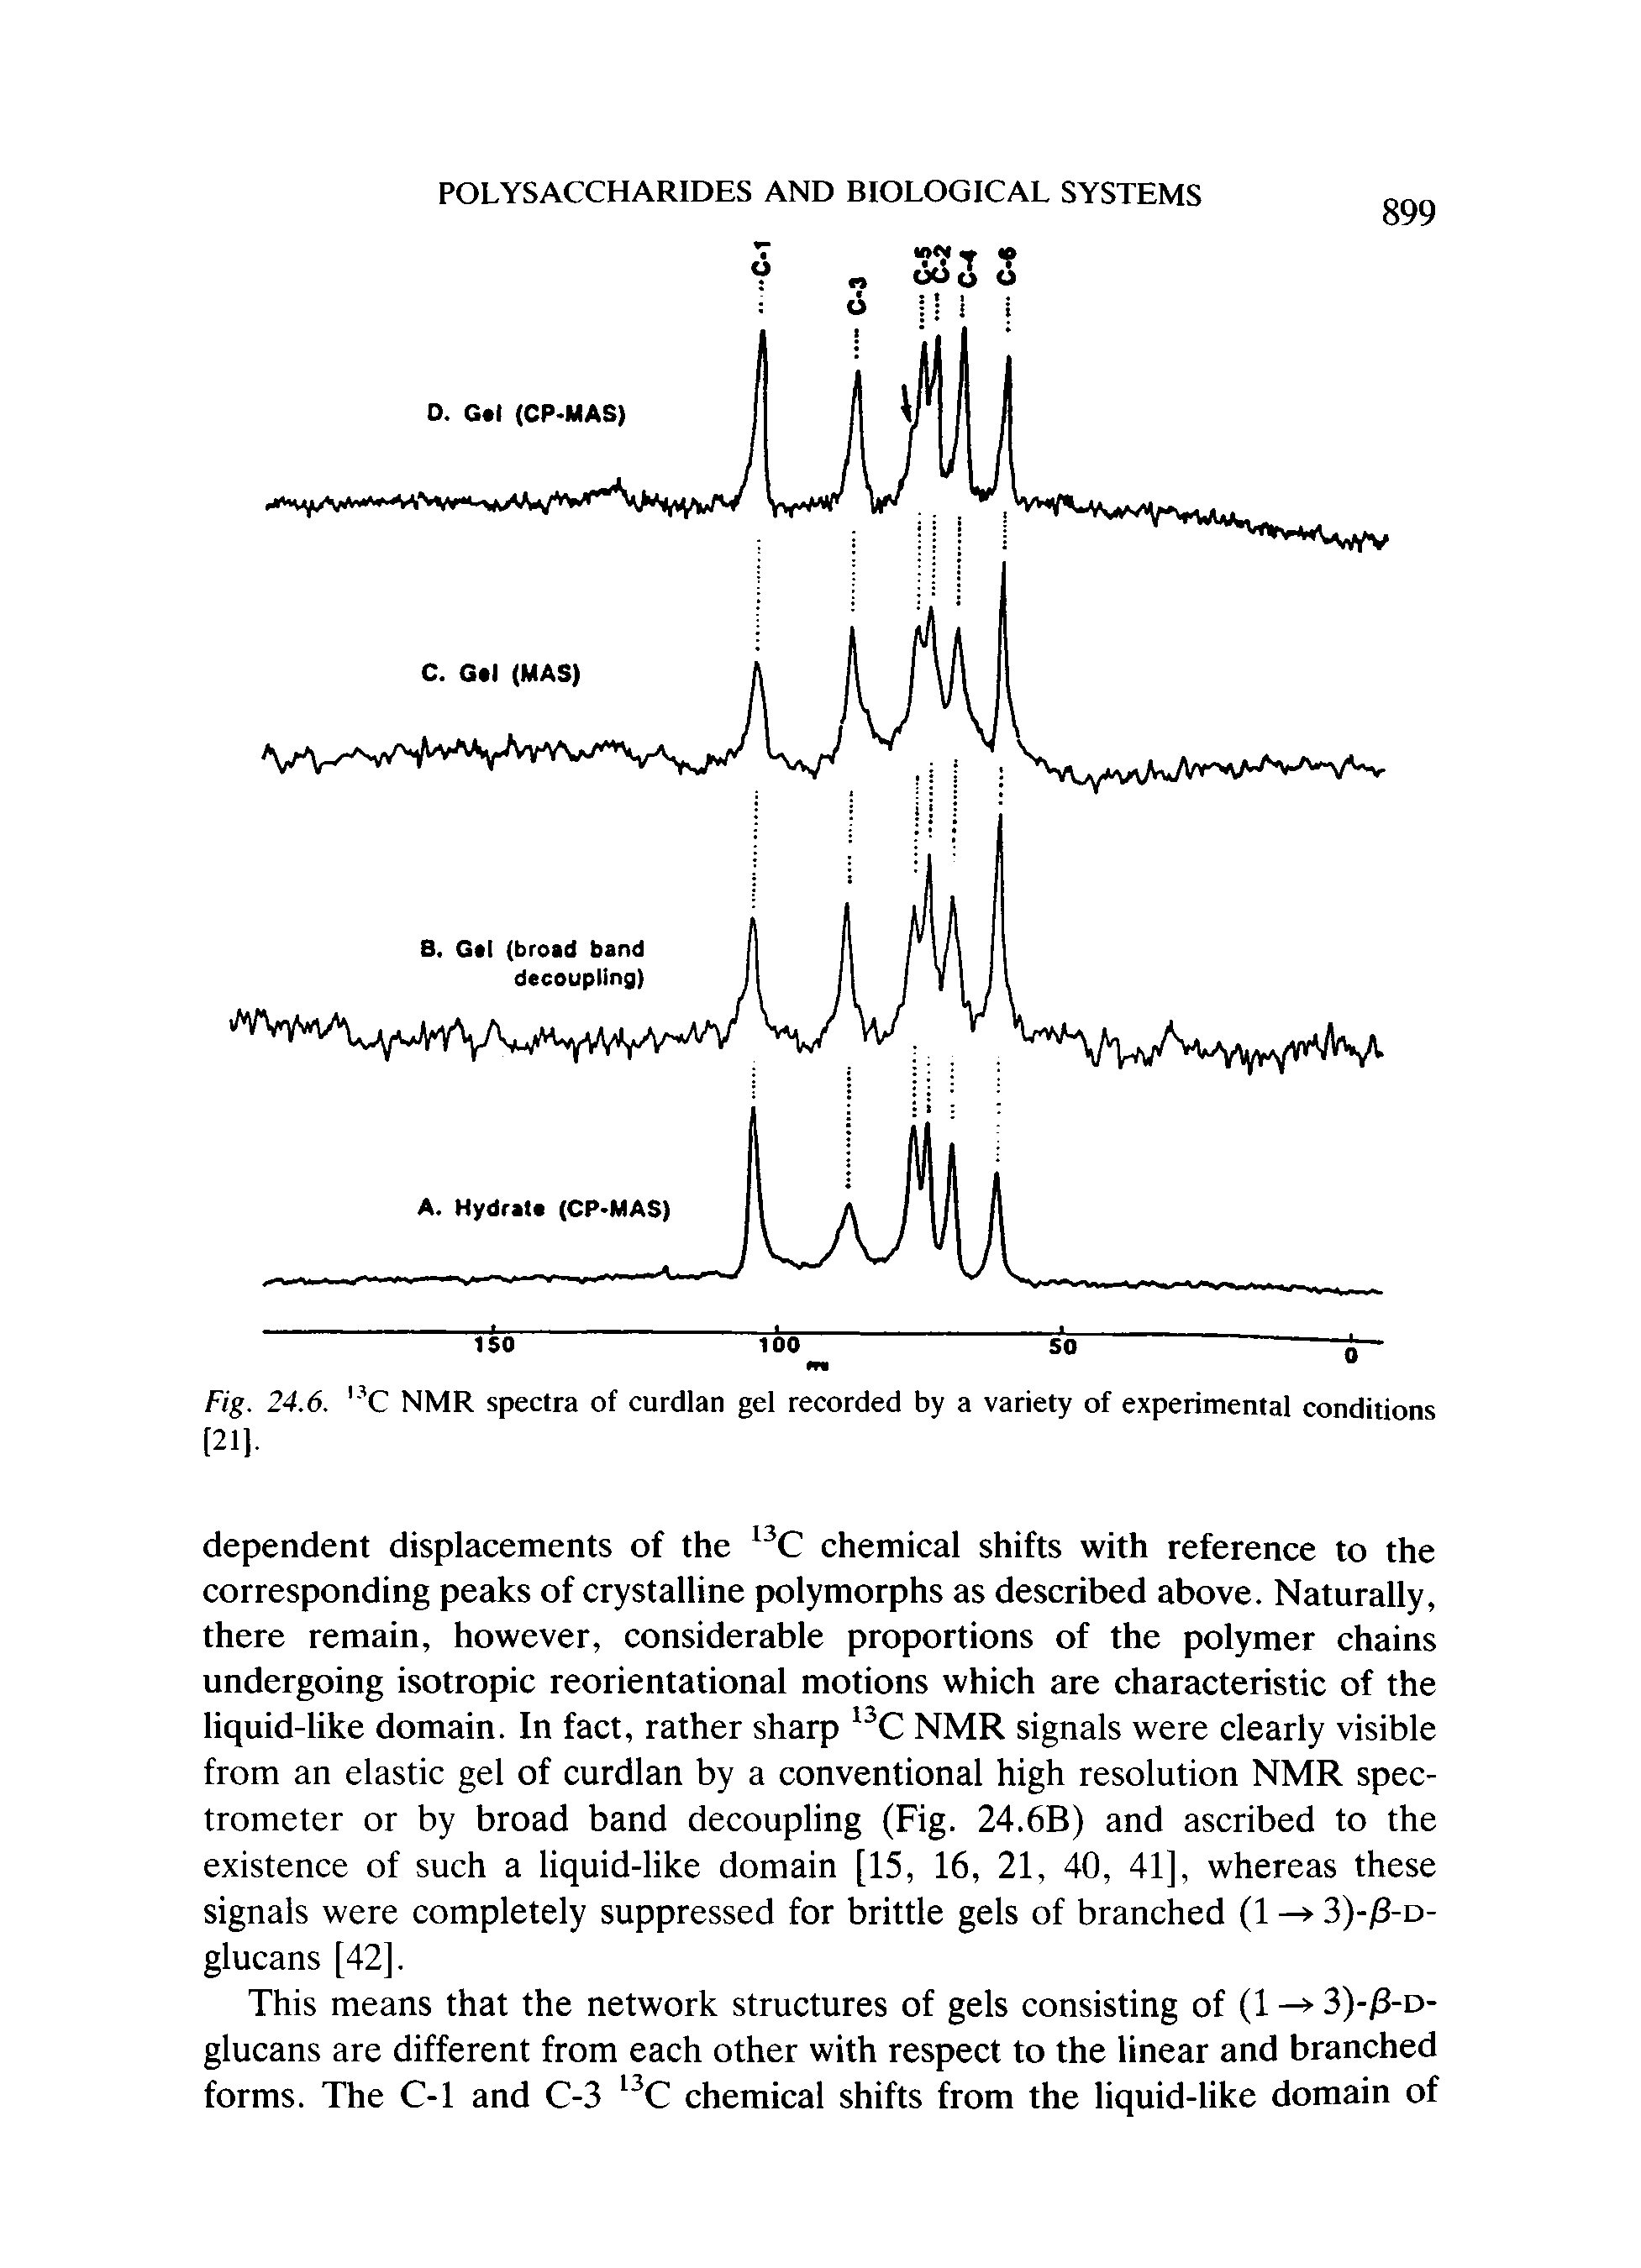 Fig. 24.6. C NMR spectra of curdlan gel recorded by a variety of experimental conditions [21].